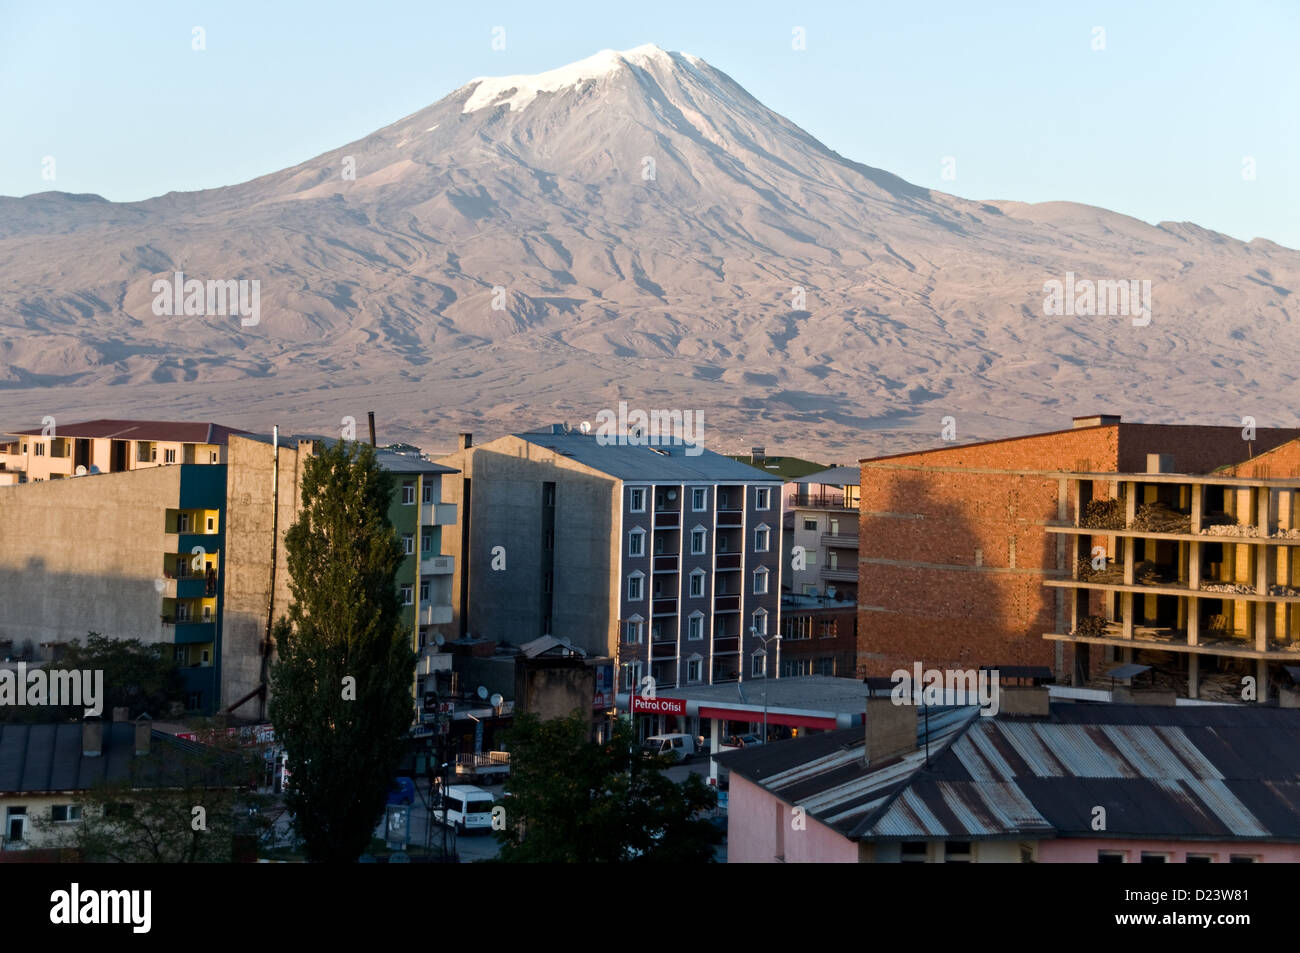 Mount Ararat, or Agri Dagi, a snowcapped dormant volcanic massif towers over the town of Dogubeyazit in eastern Anatolia, Turkey. Stock Photo